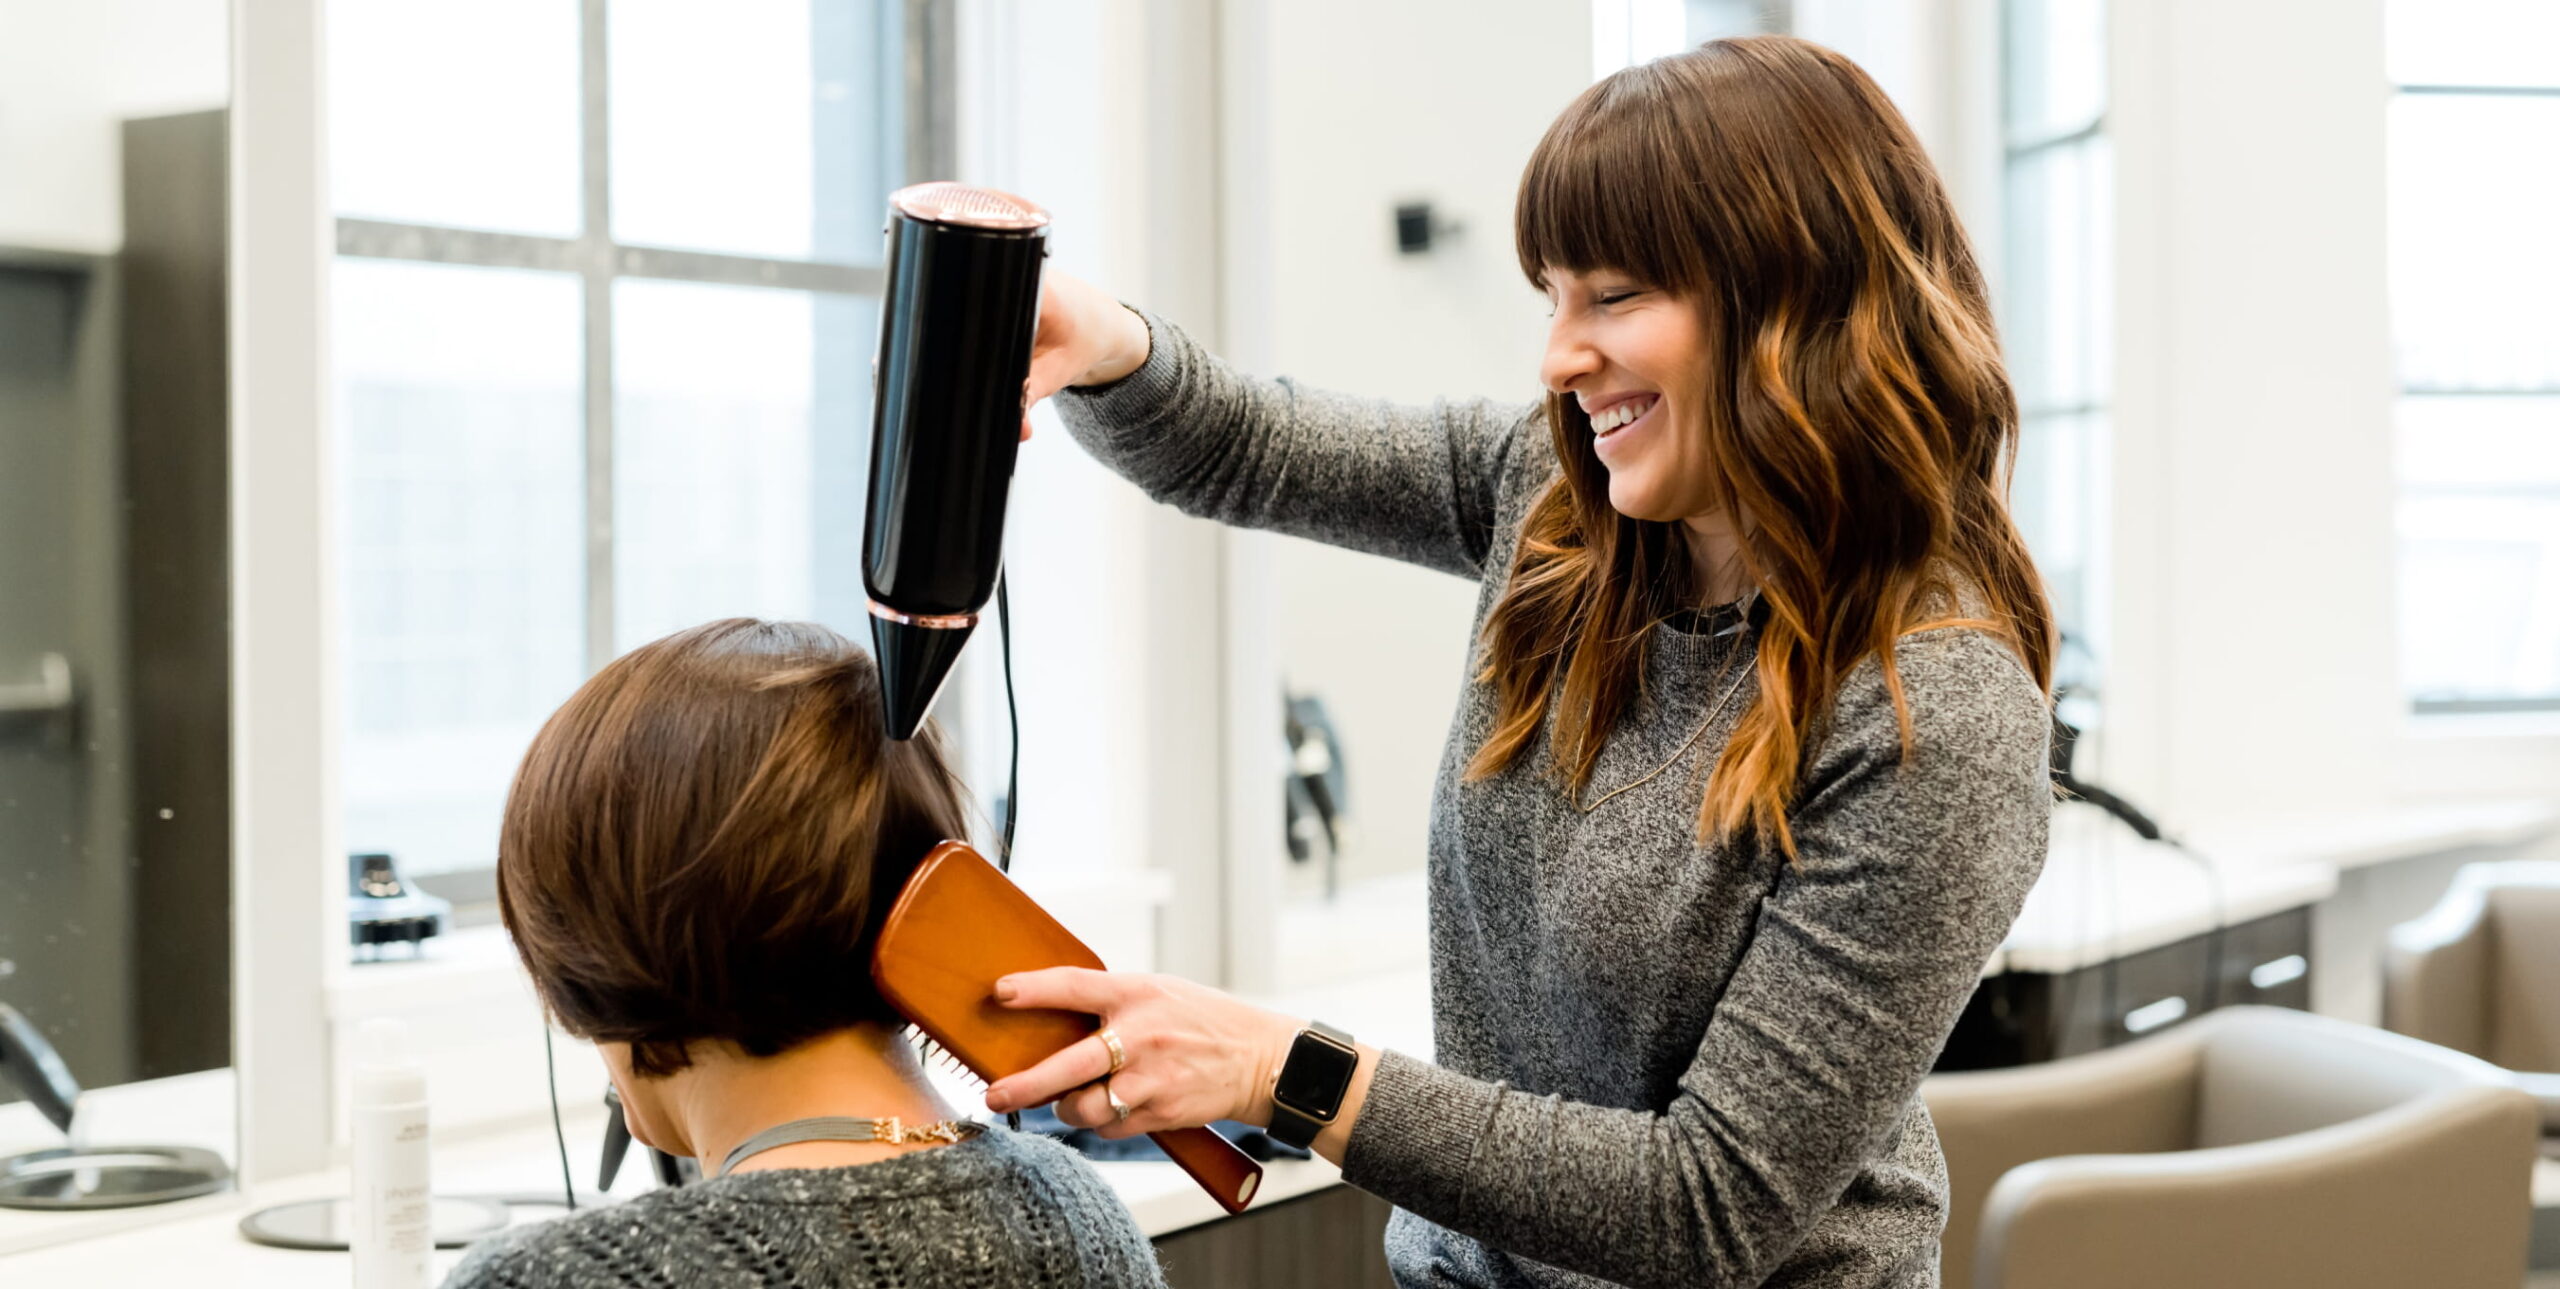 Stylist blow-drying the hair of a woman seated in front of her.